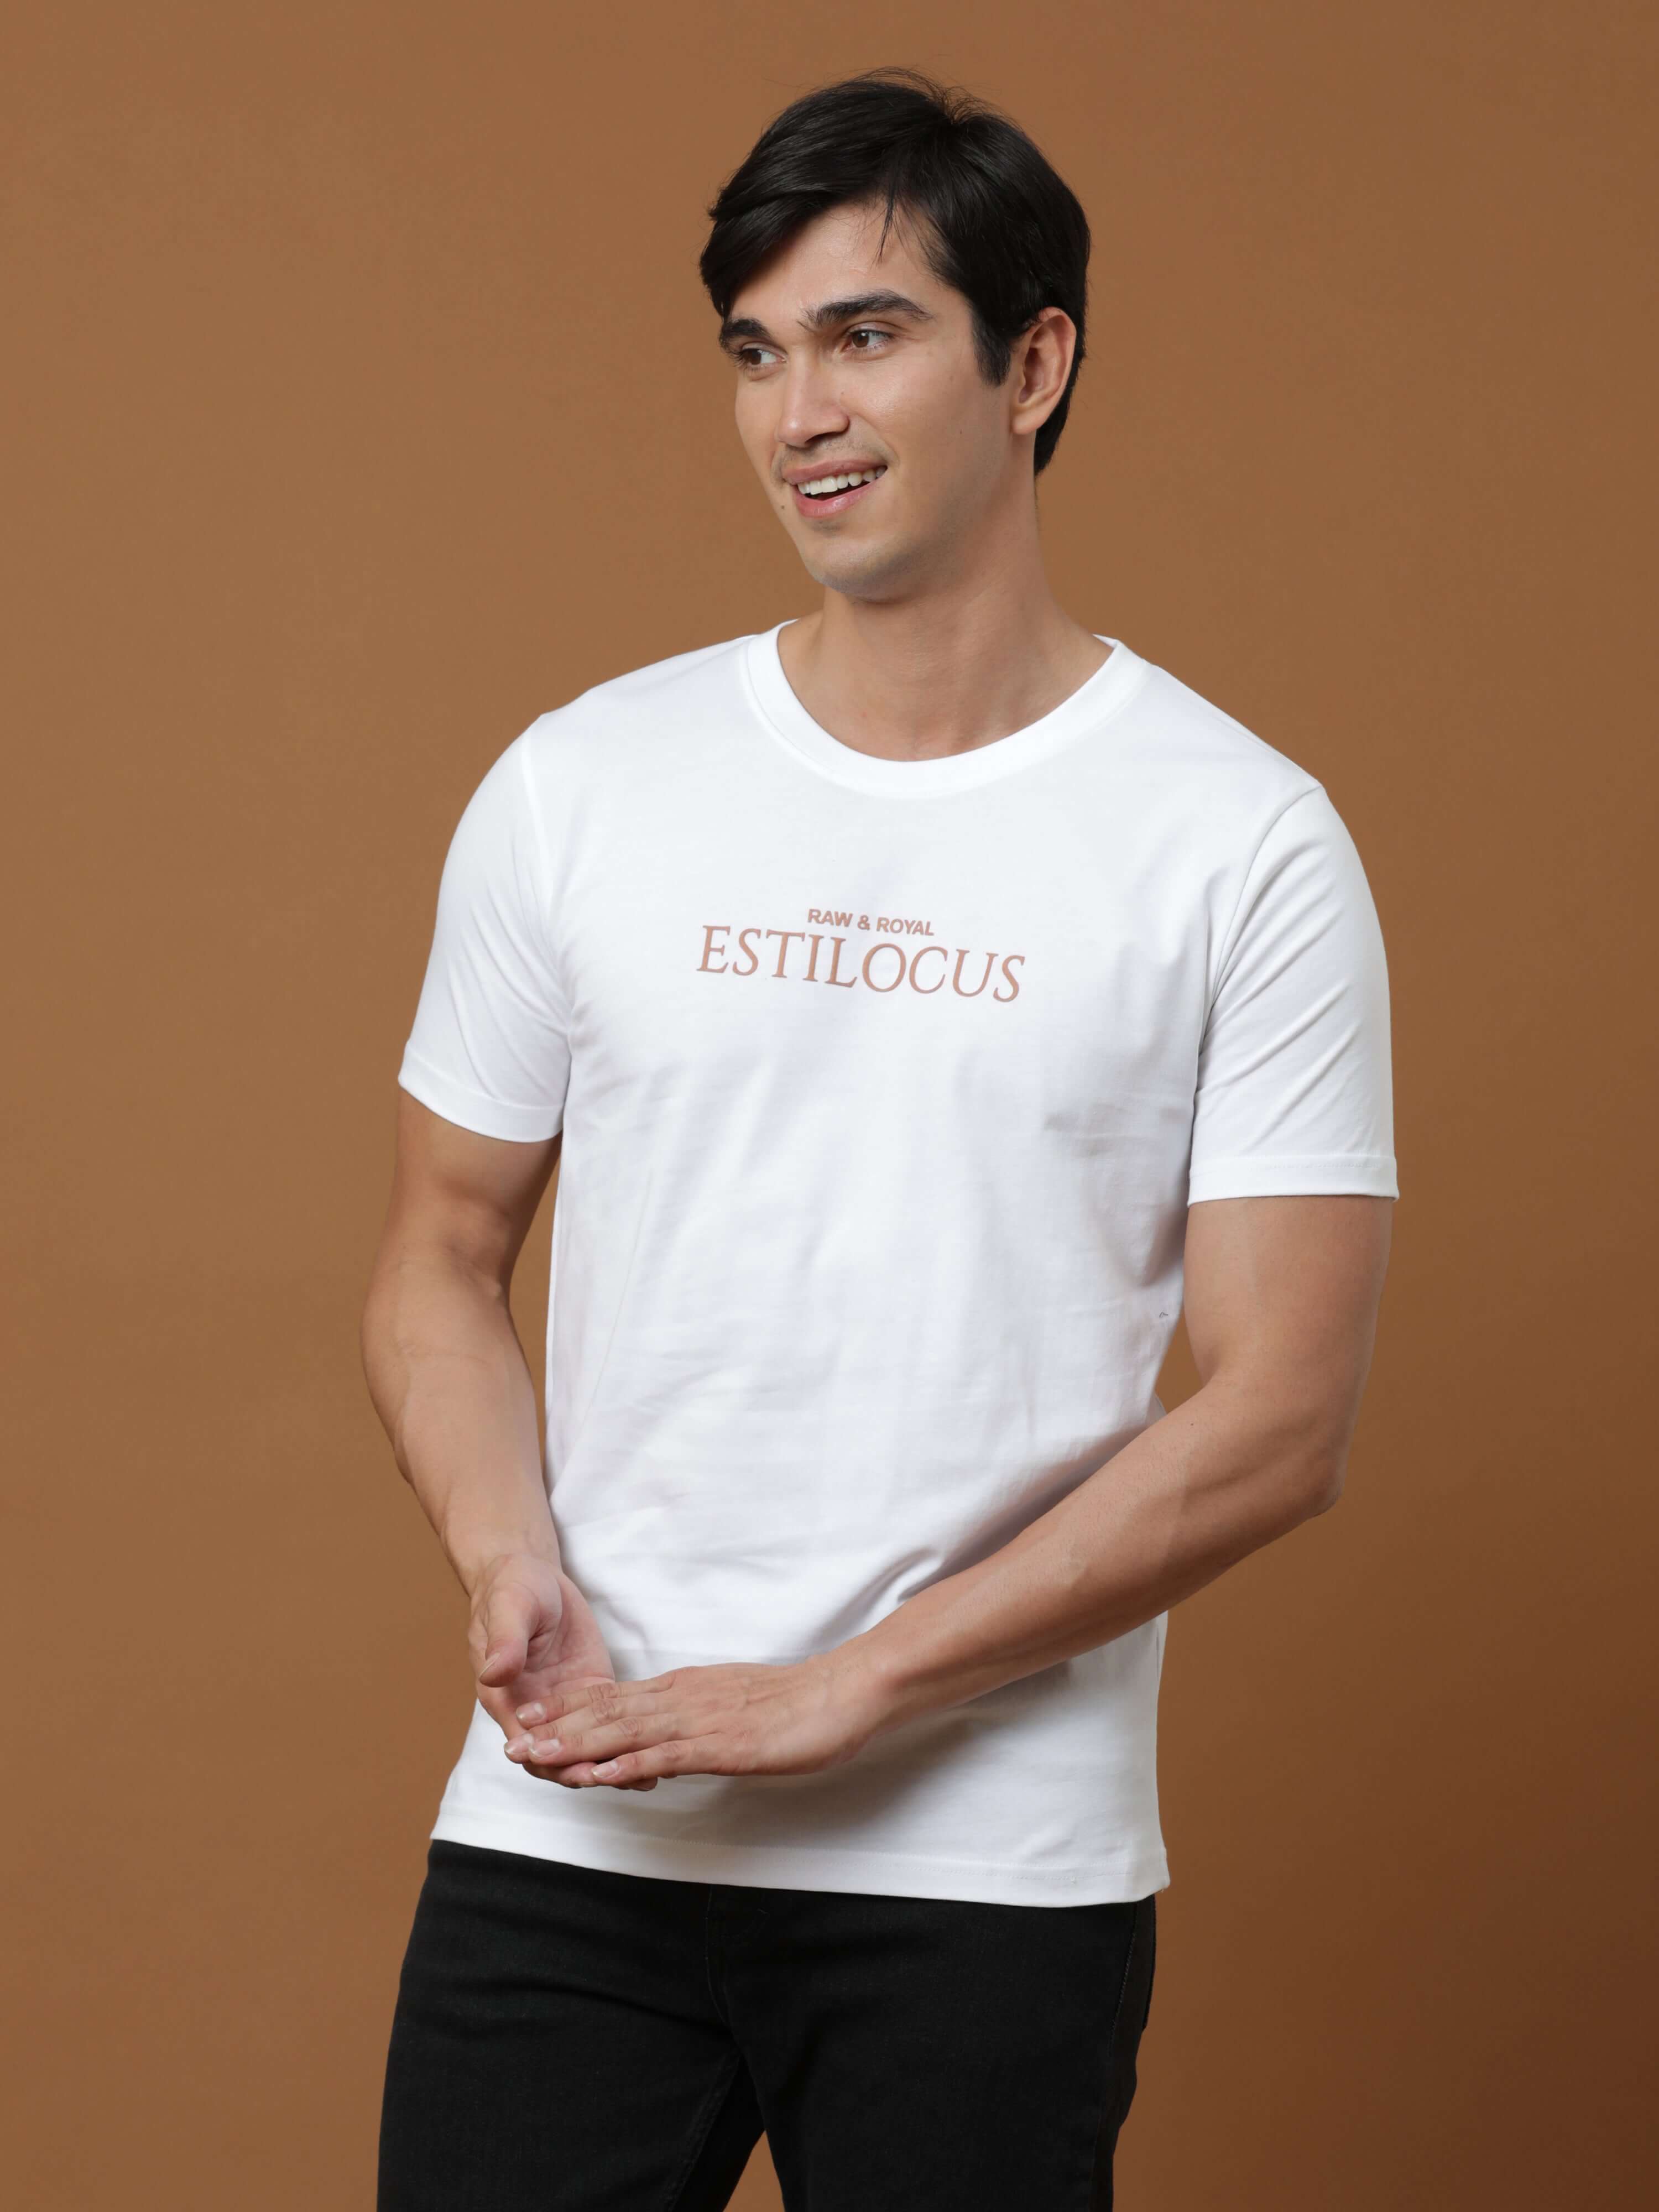 Estilocus White Printed T Shirt shop online at Estilocus. 100% Cotton Designed and printed on knitted fabric. The fabric is stretchy and lightweight, with a soft skin feel and no wrinkles. Crew neck collar which is smooth on the neck and keeps you comfort